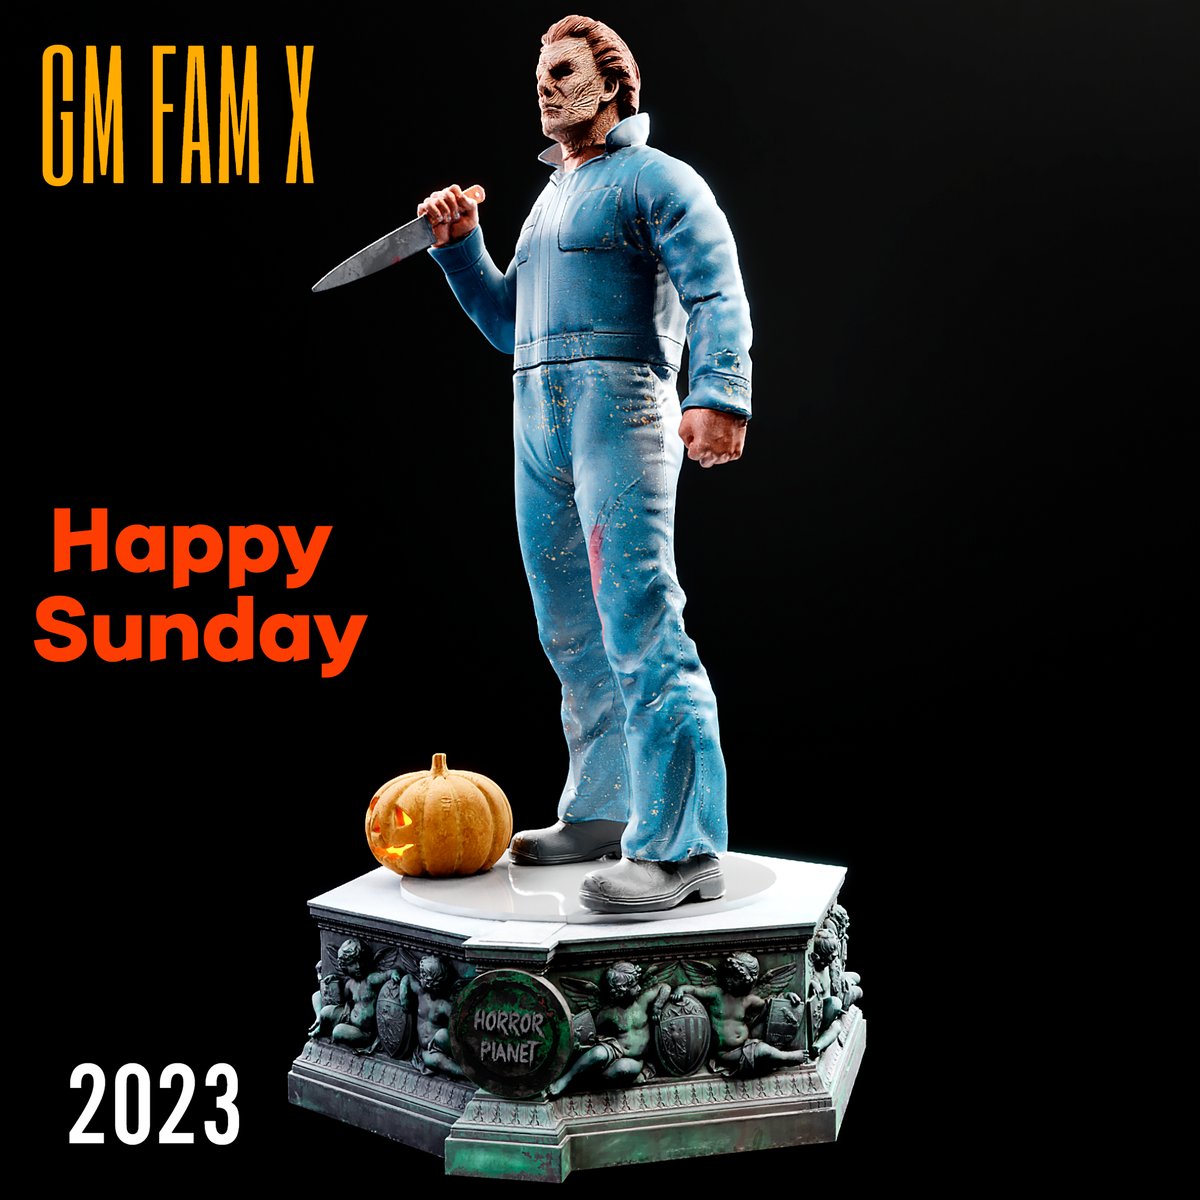 GM Fam X. October is the time when every horror fan feels a special energy and turns on their favorite horror movie. And today is the last Sunday of this month, so let's enjoy every moment of horror!🔪🎃 #HorrorCommunity #Horrorfam #HorrorGames